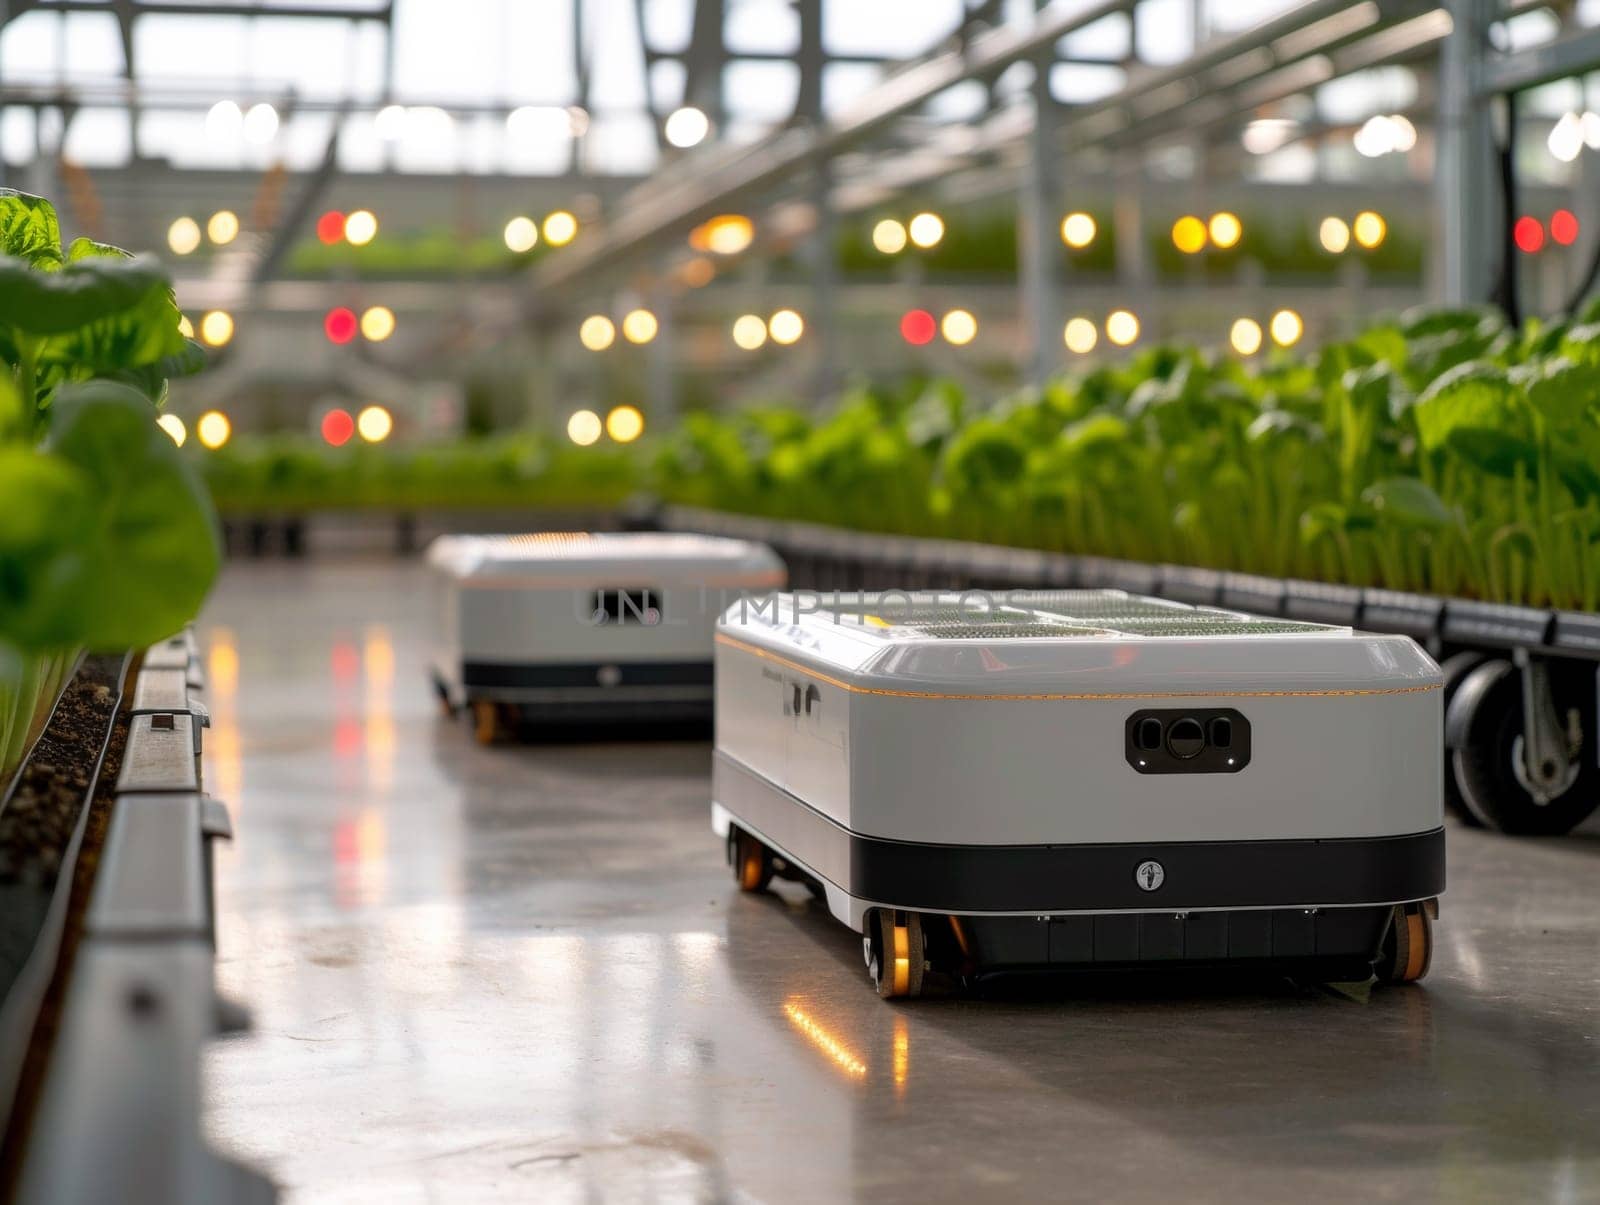 Two small robots are driving through a greenhouse filled with plants, AI by starush